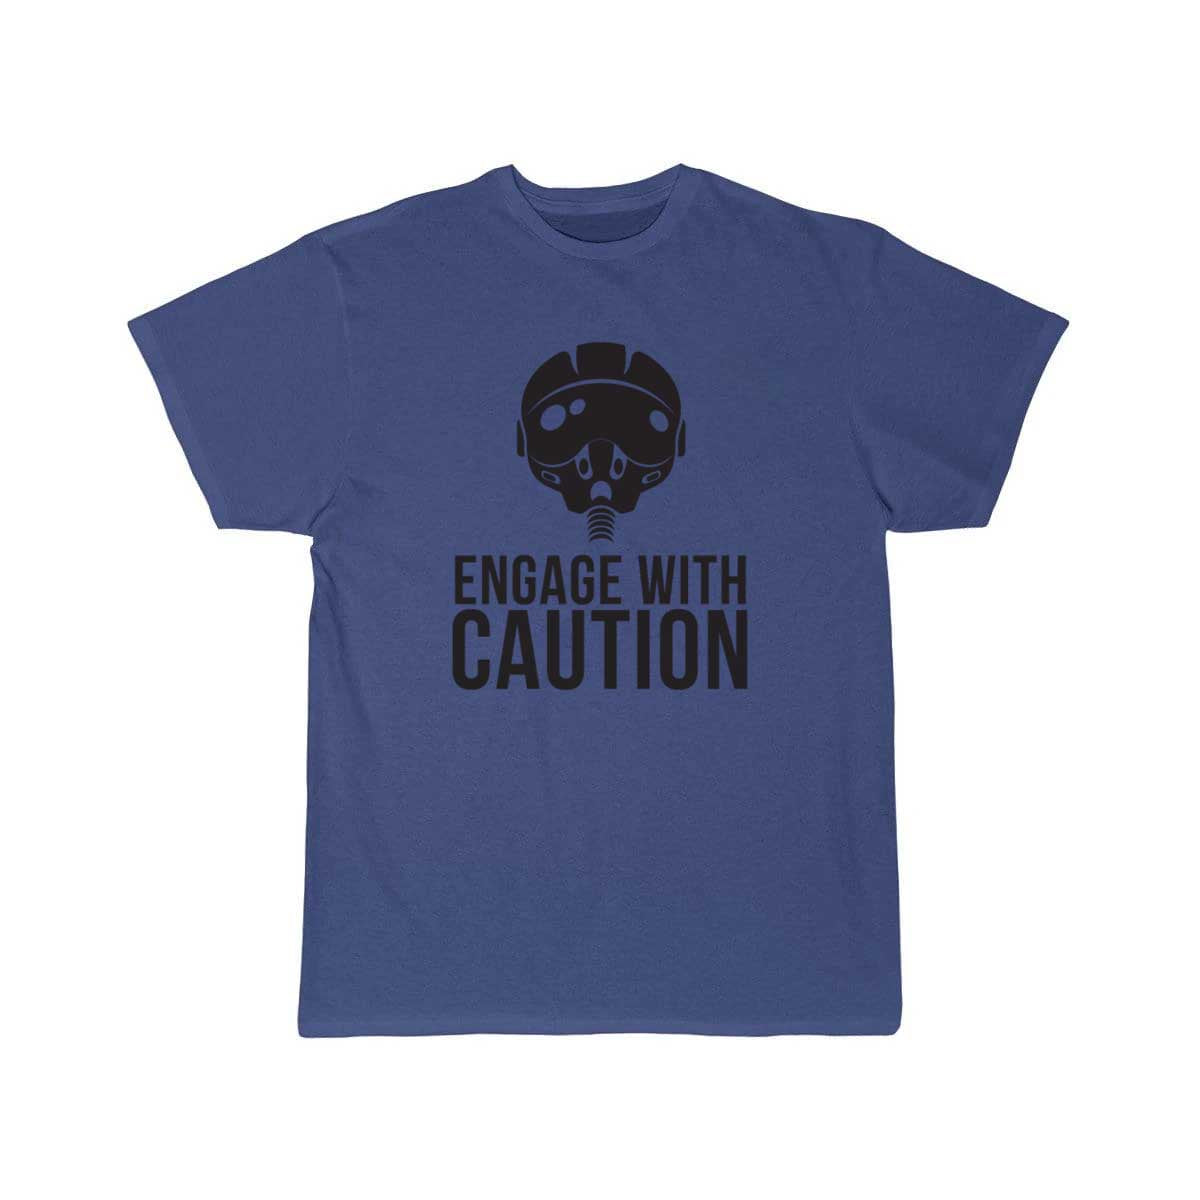 Engage with Caution fighter pilot T SHIRT THE AV8R